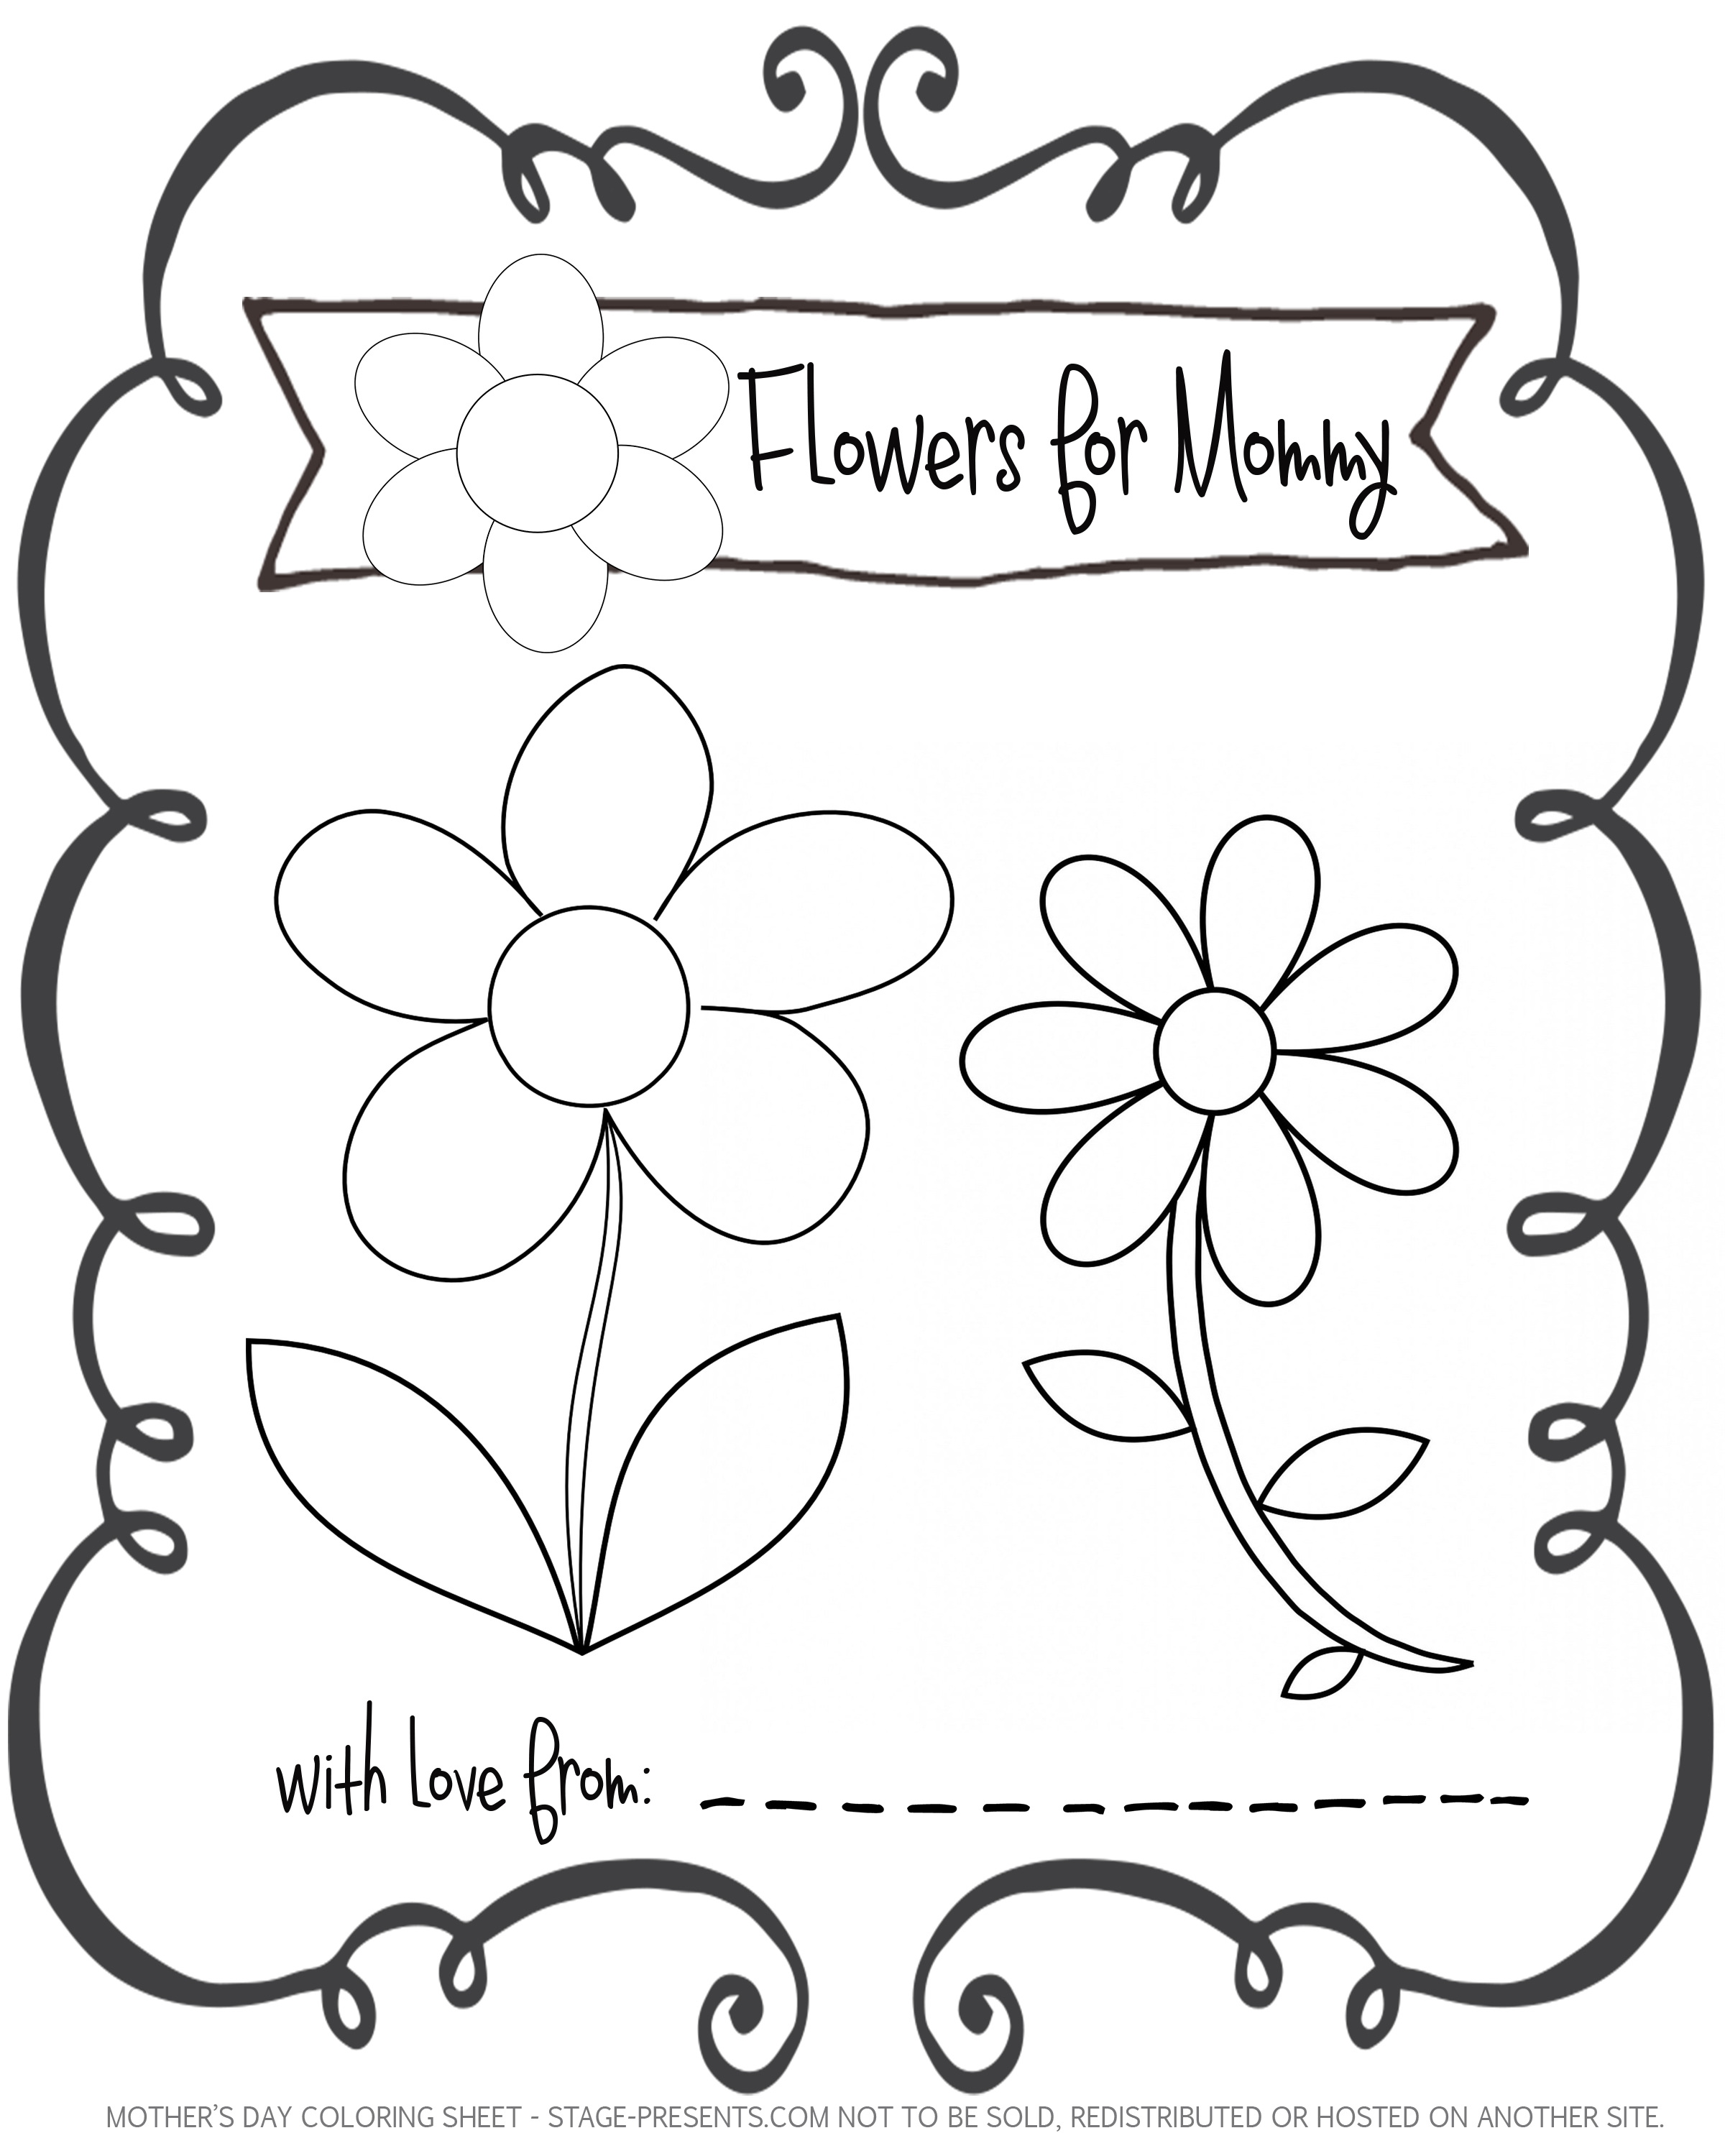 flowers-for-mommy-free-printable-coloring-sheet-stage-presents